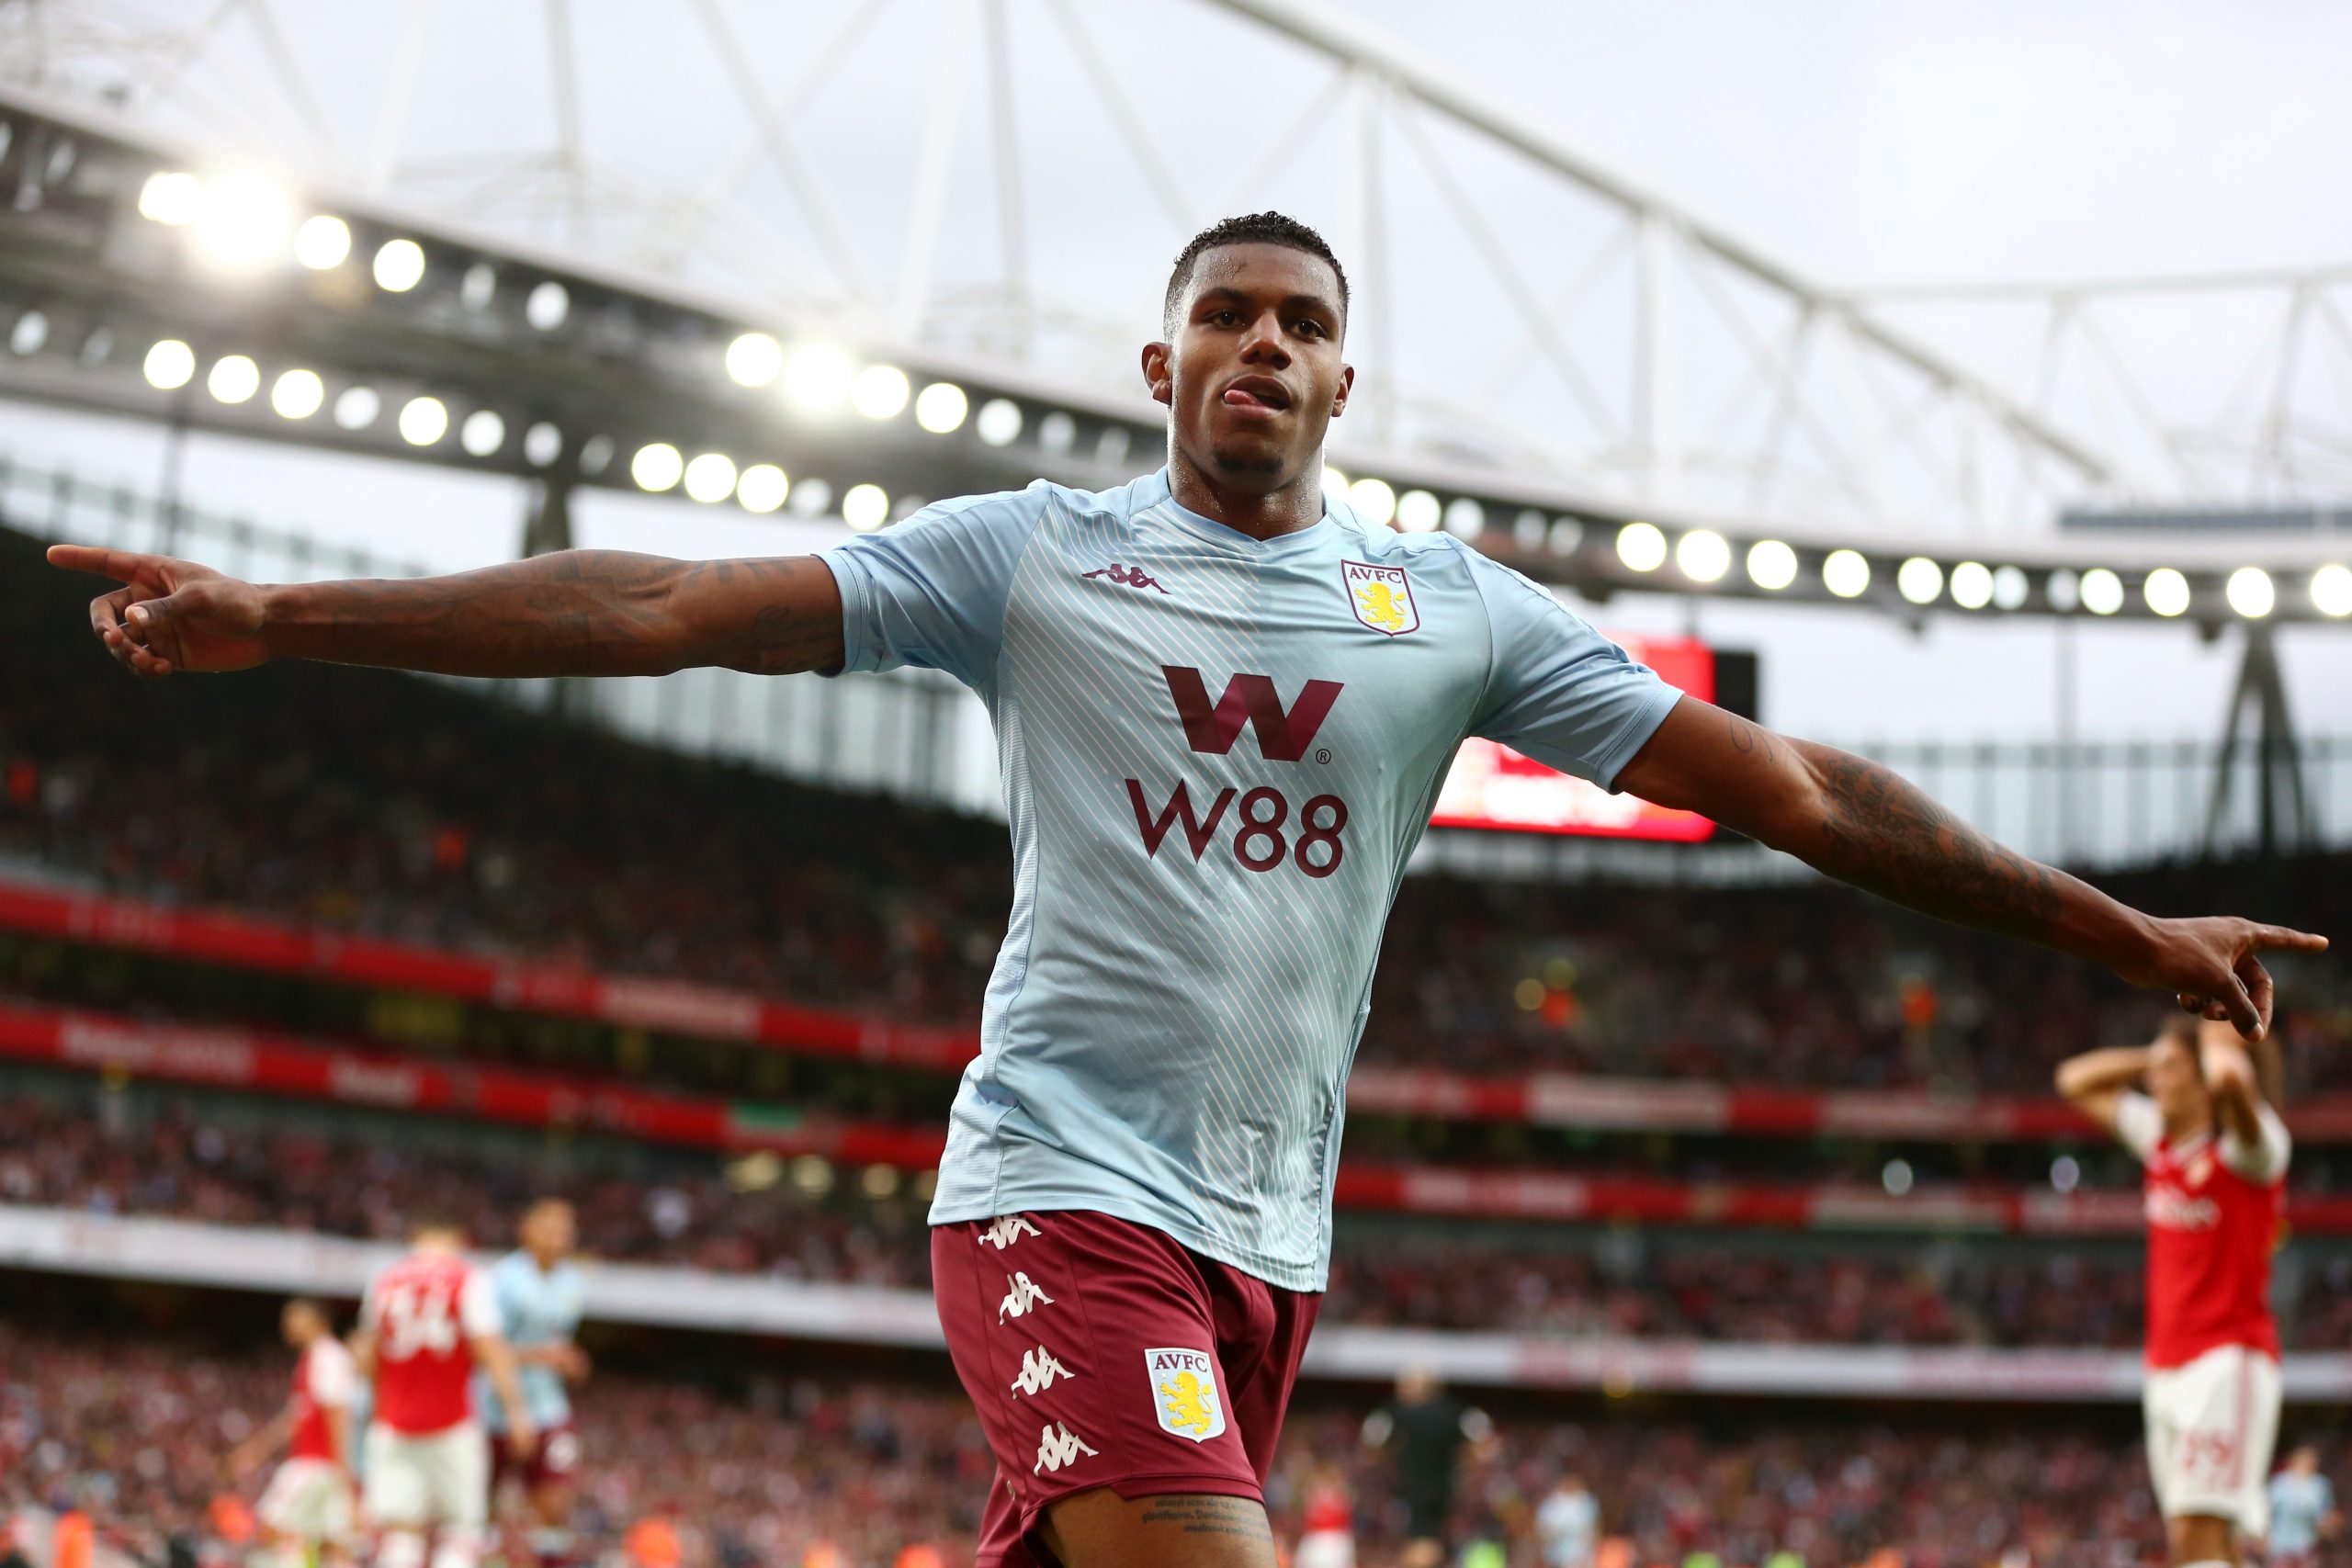 Wesley, who arrived at Aston Villa last summer has been far from impressive, having managed just five Premier League goals this season. 